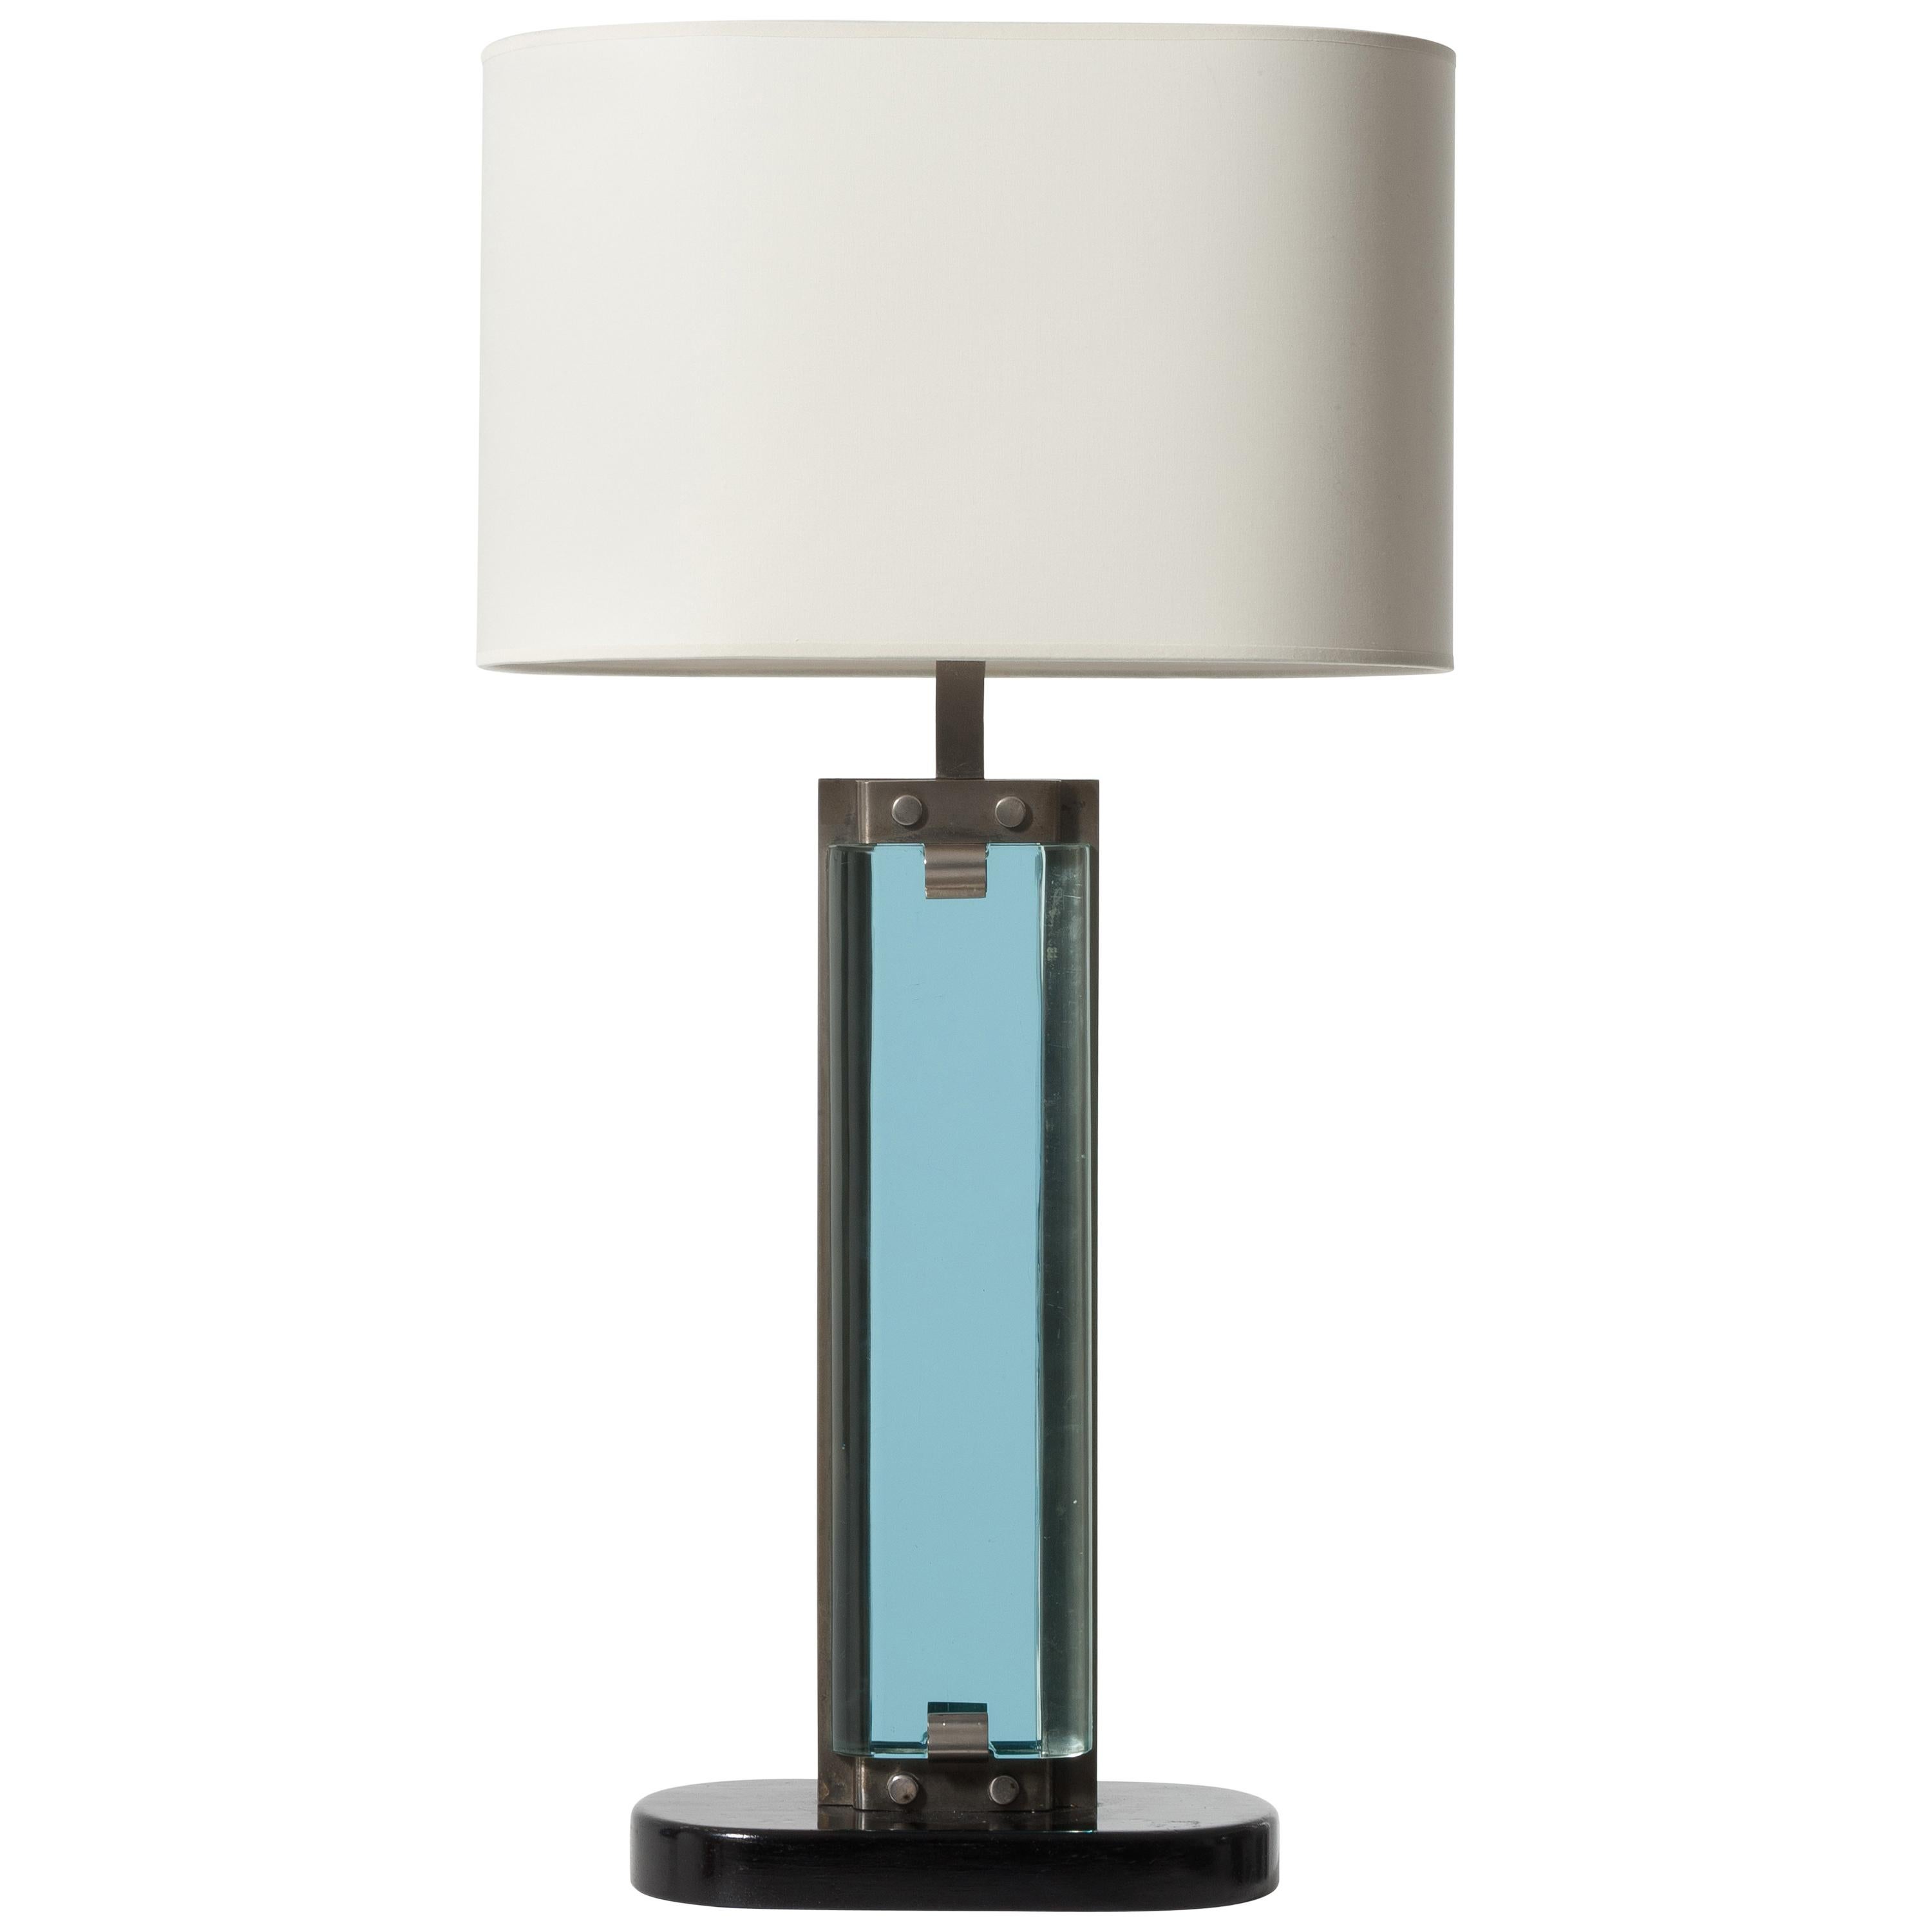 Italian High Vintage Table Lamp Wood Metal and Thick Glass by Fontana Arte, 1940 For Sale